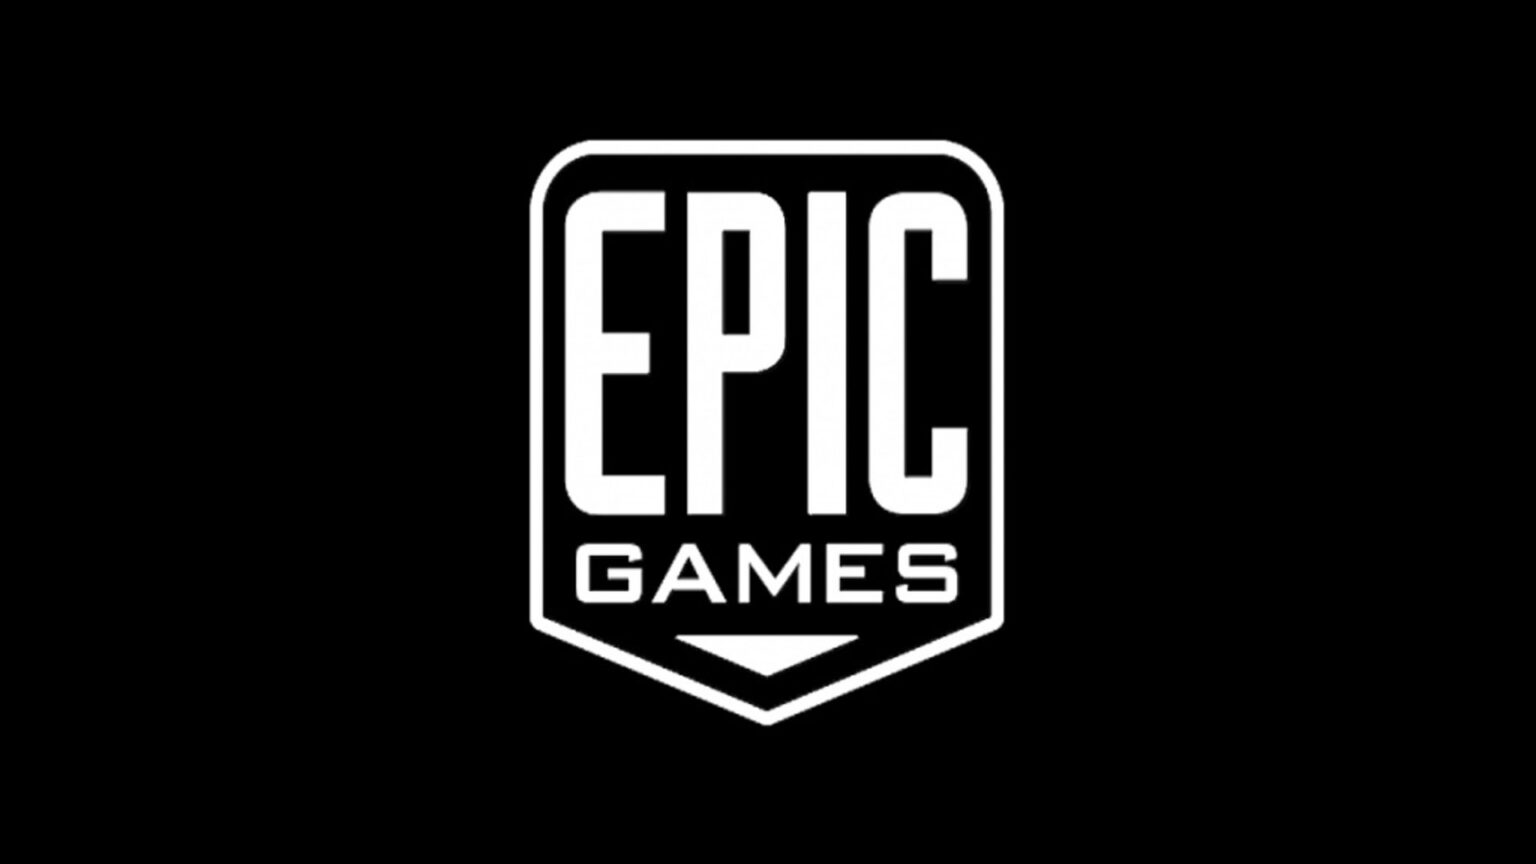 Sony and KIRKBI Invest in Epic Games featured image